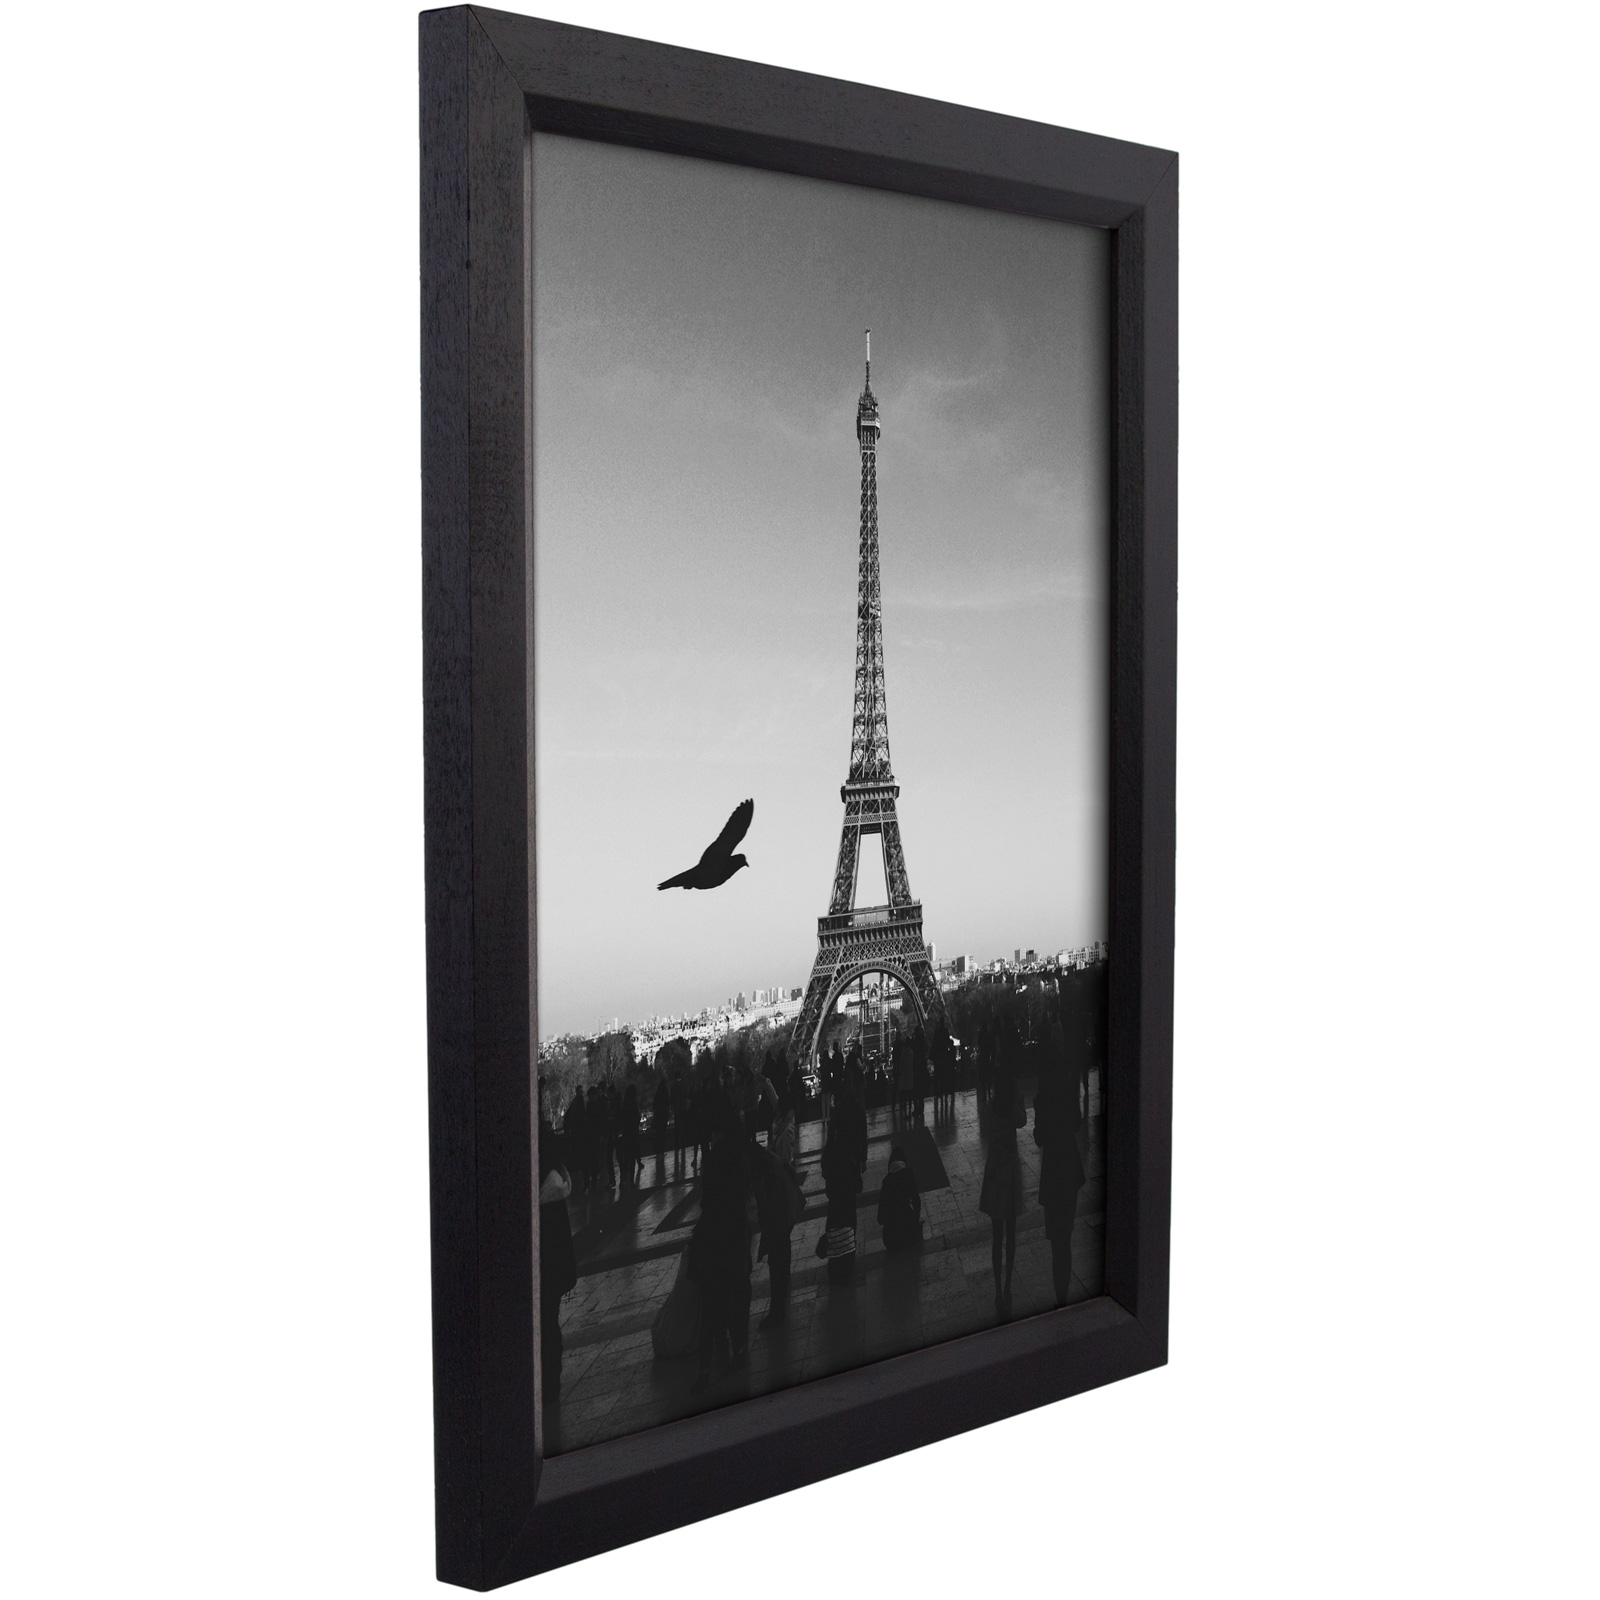 Craig Frames Inc Economy Solid Wood Picture Frame (1610)